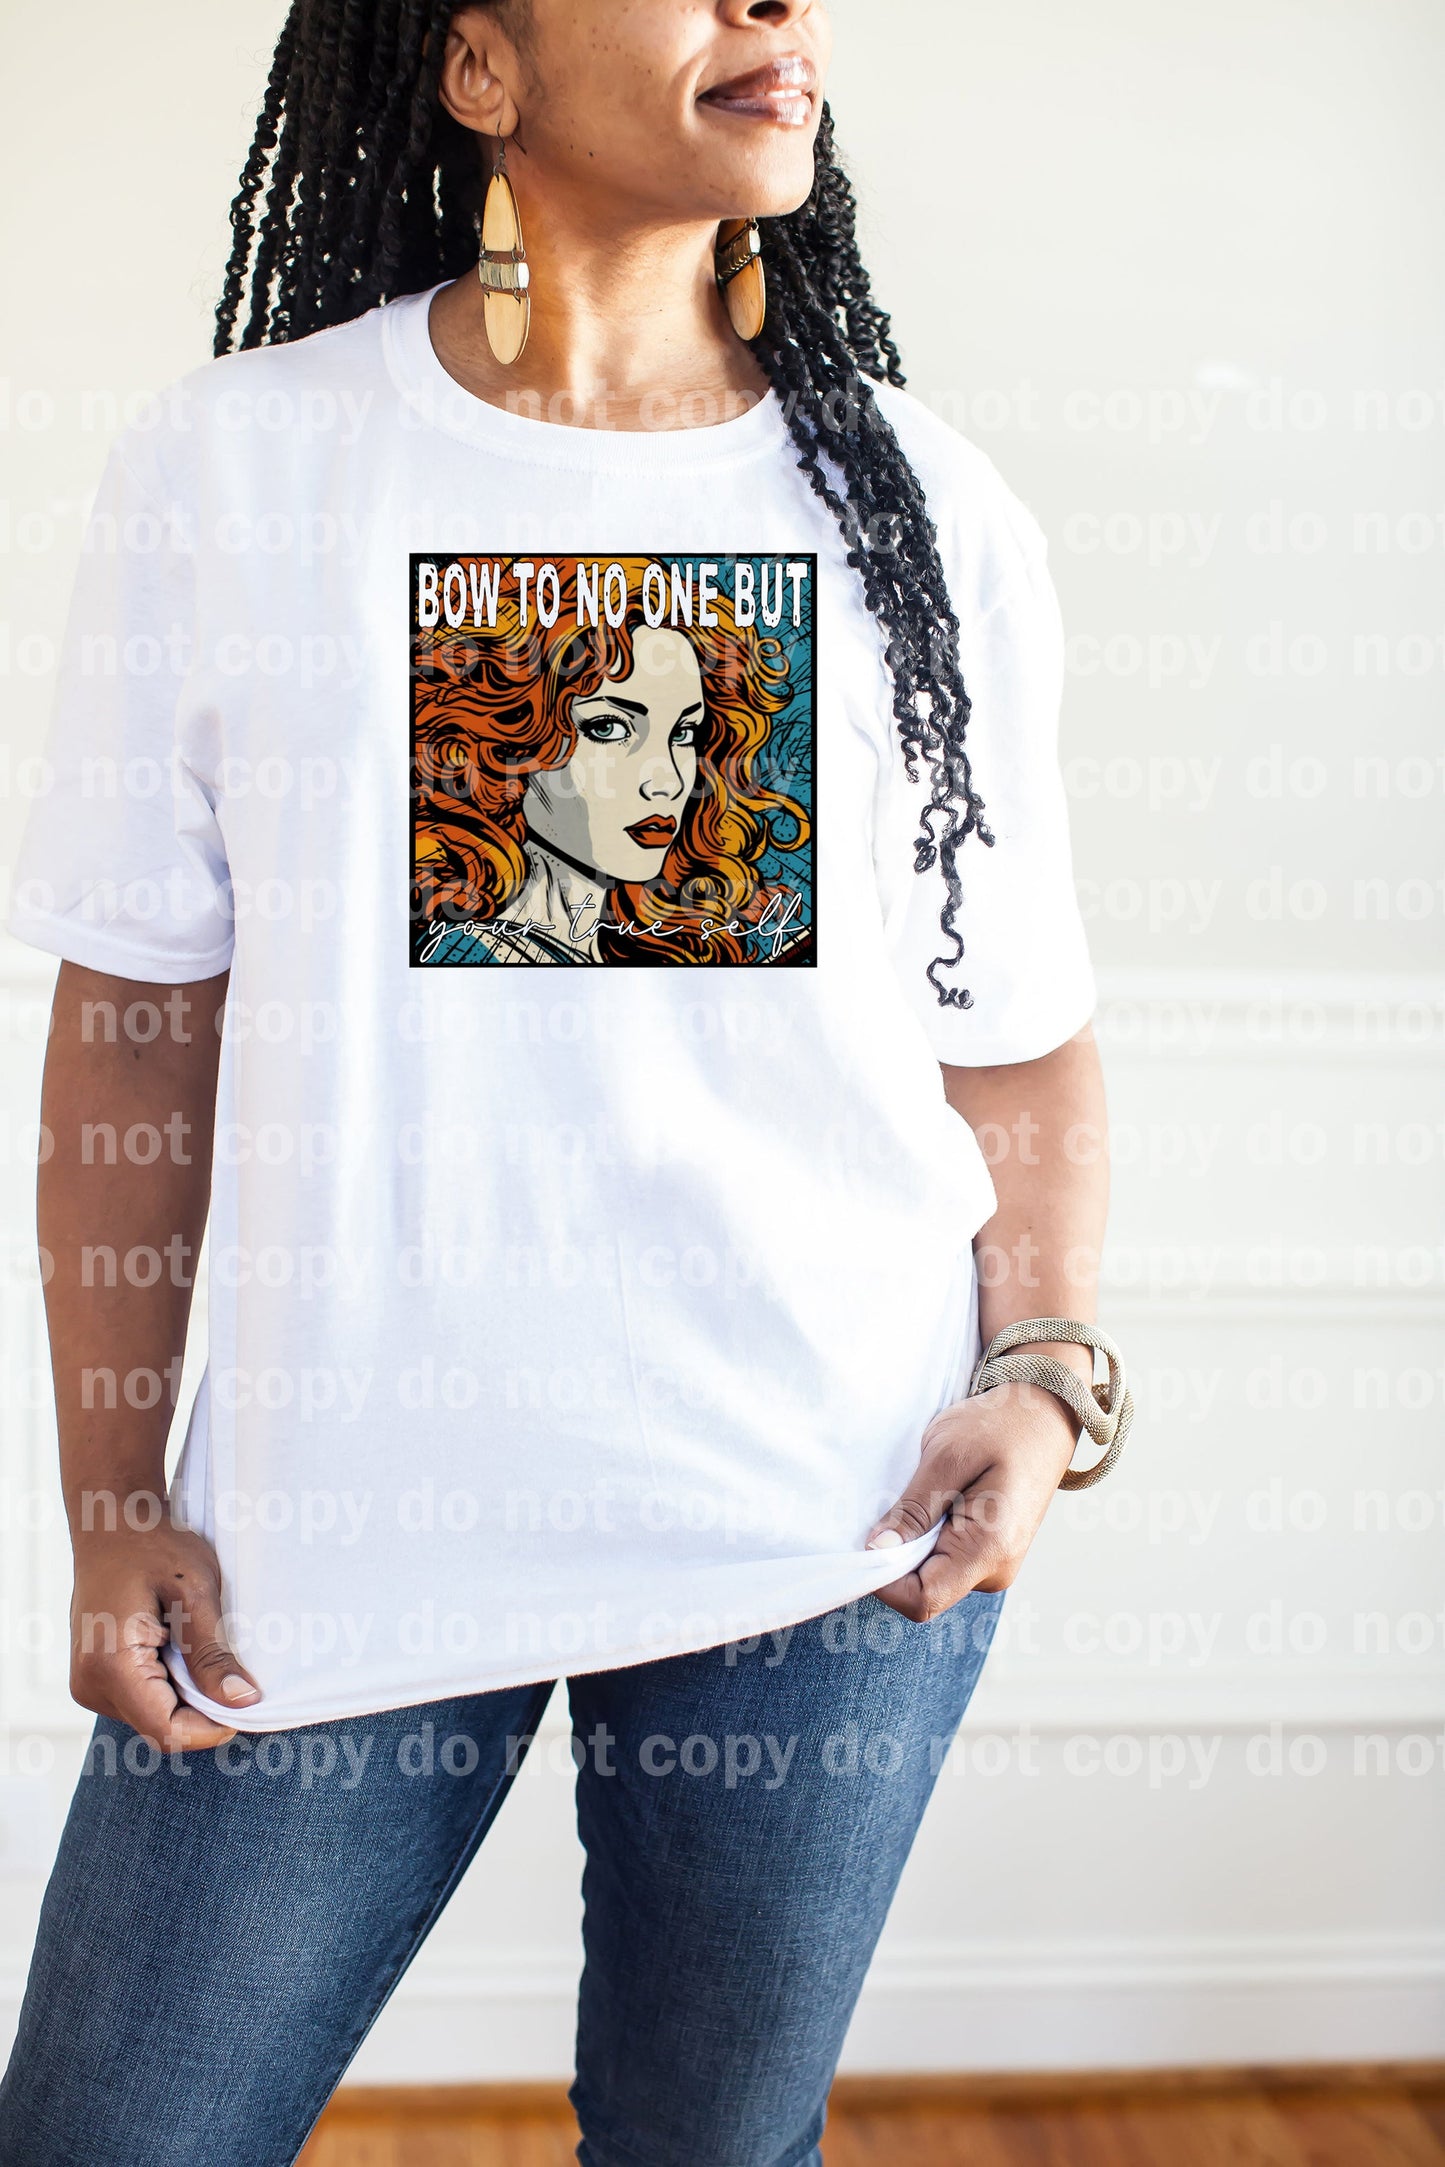 Bow To No One But Your True Self Dream Print or Sublimation Print